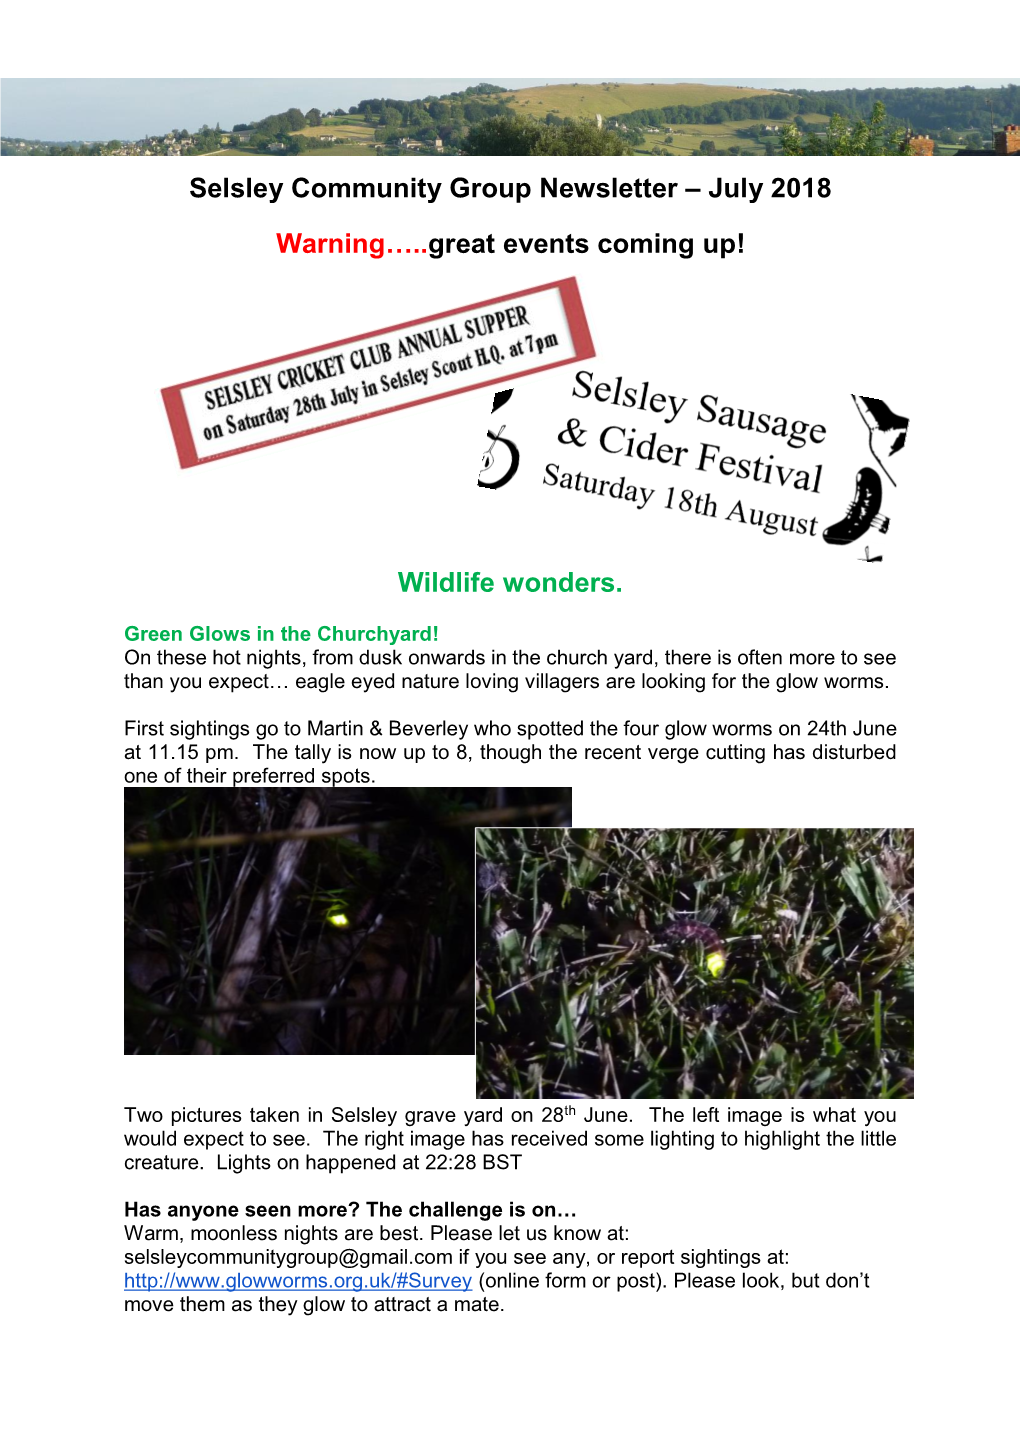 Selsley Community Group Newsletter – July 2018 Warning…..Great Events Coming Up! Wildlife Wonders